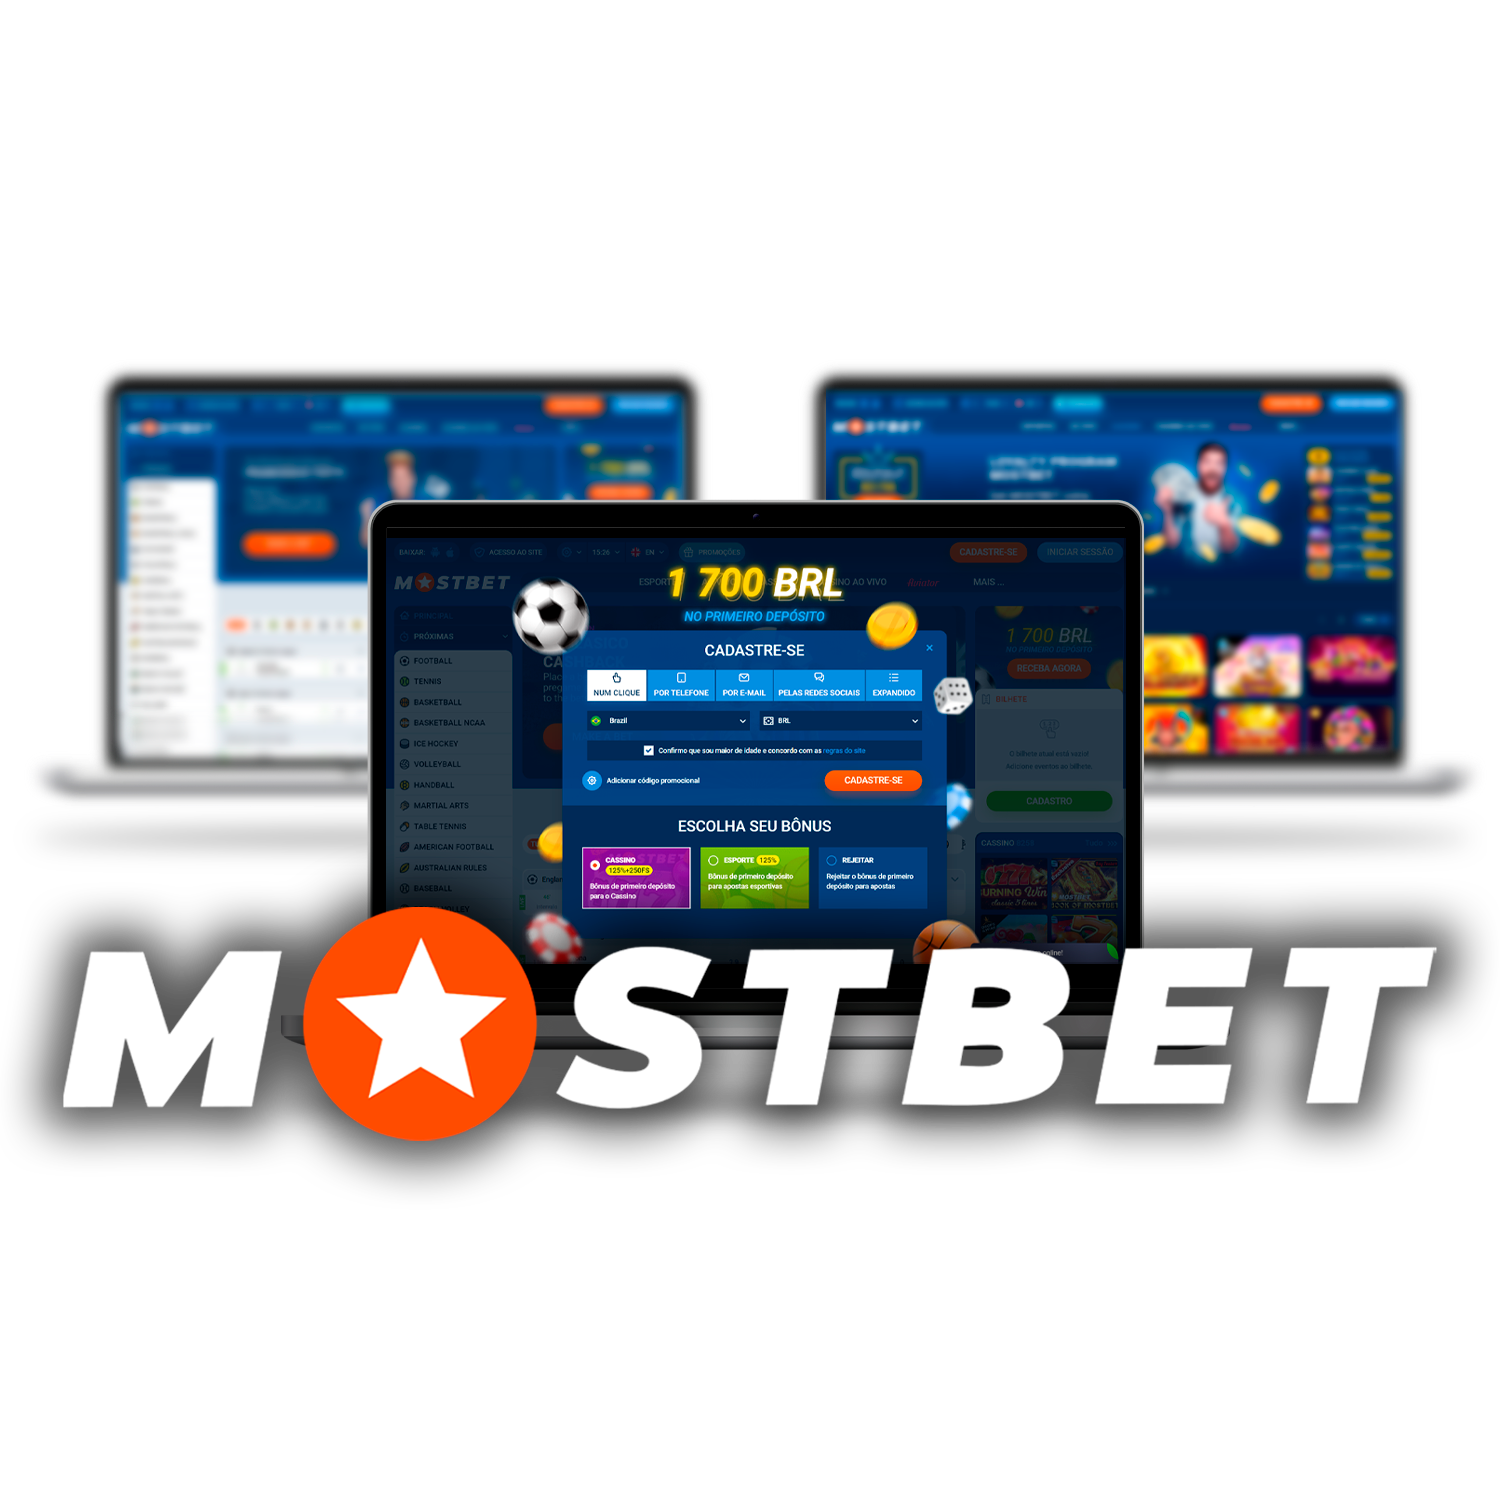 Create an account on the official Mostbet website.